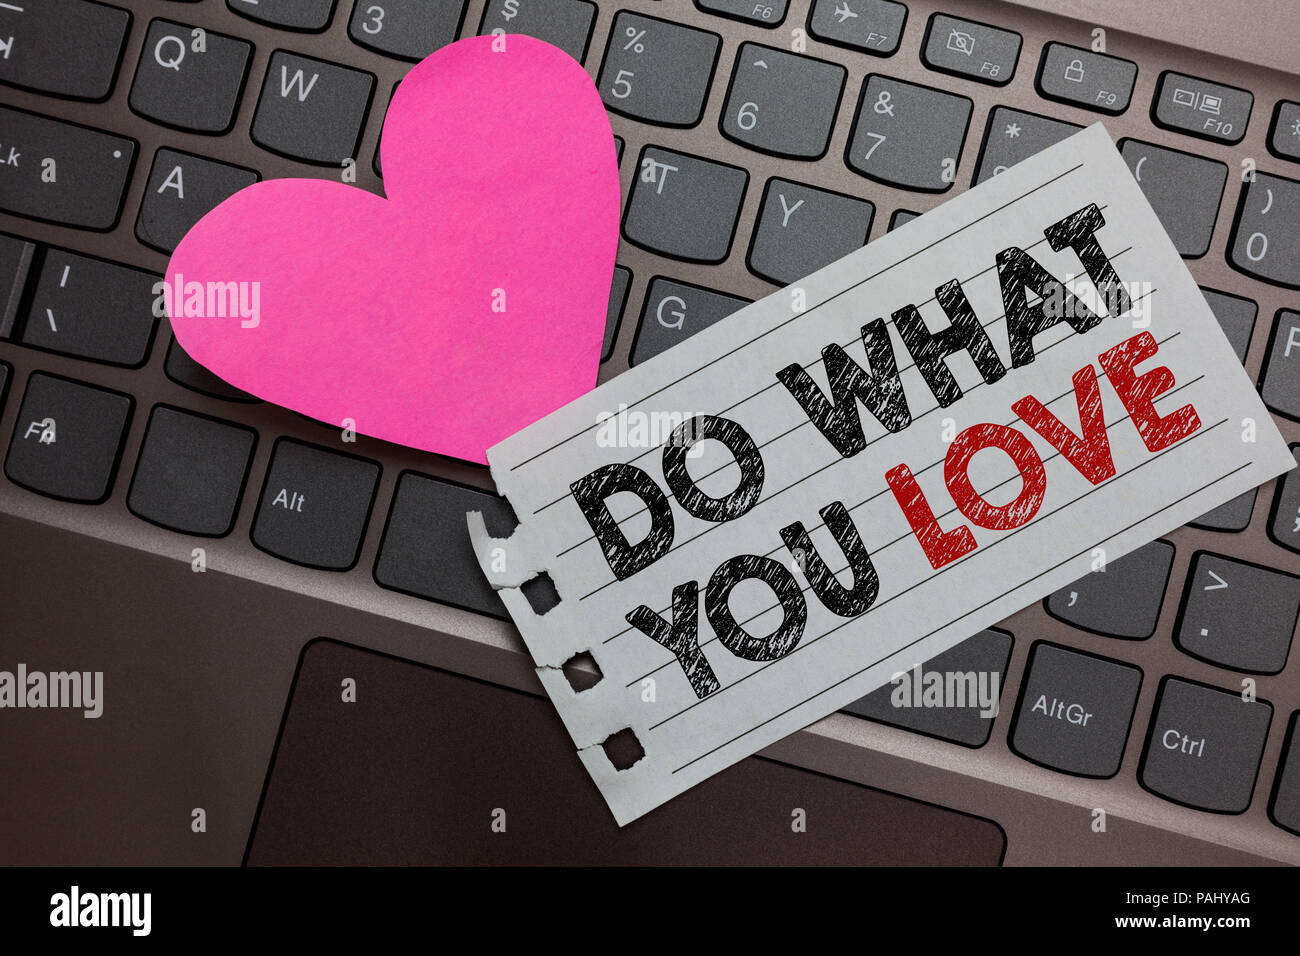 Word Writing Text Do What You Love Business Concept For Make Enjoyable Things Do Activities With Motivation Ashy Computer Keyboard With Yellow Button Stock Photo Alamy